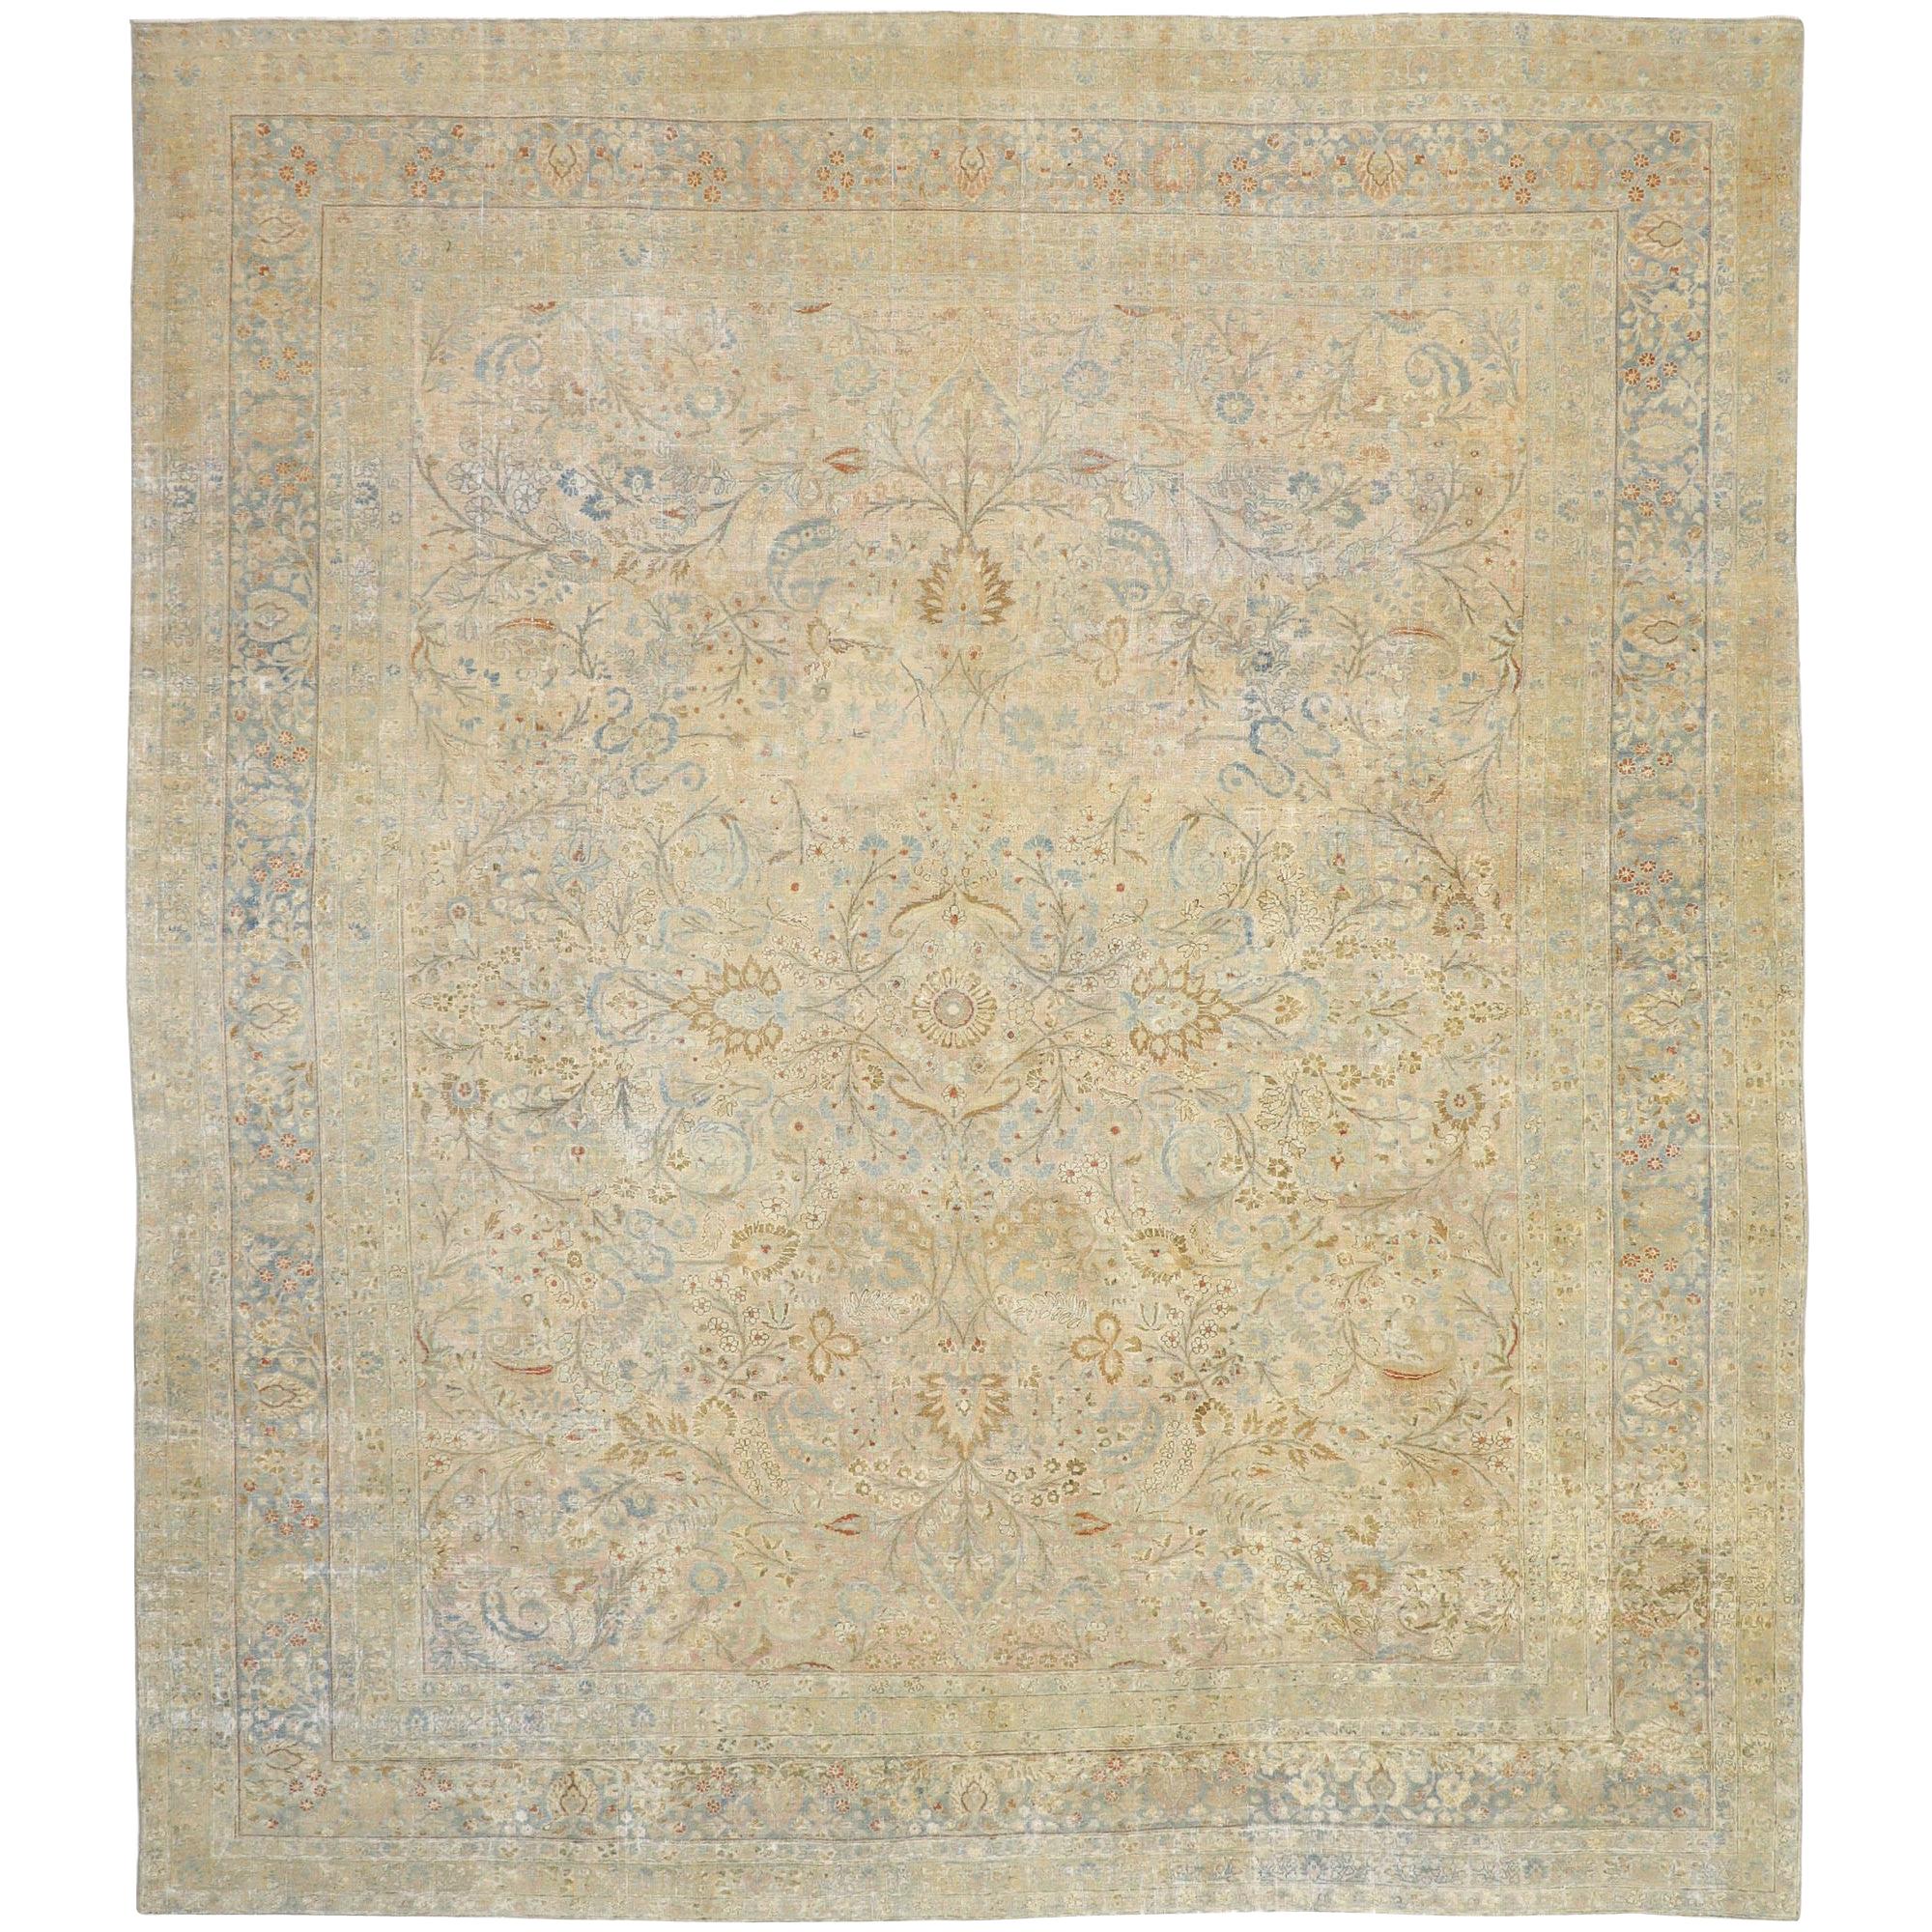 Distressed Antique Persian Khorassan Design Rug with Rustic English Manor Style